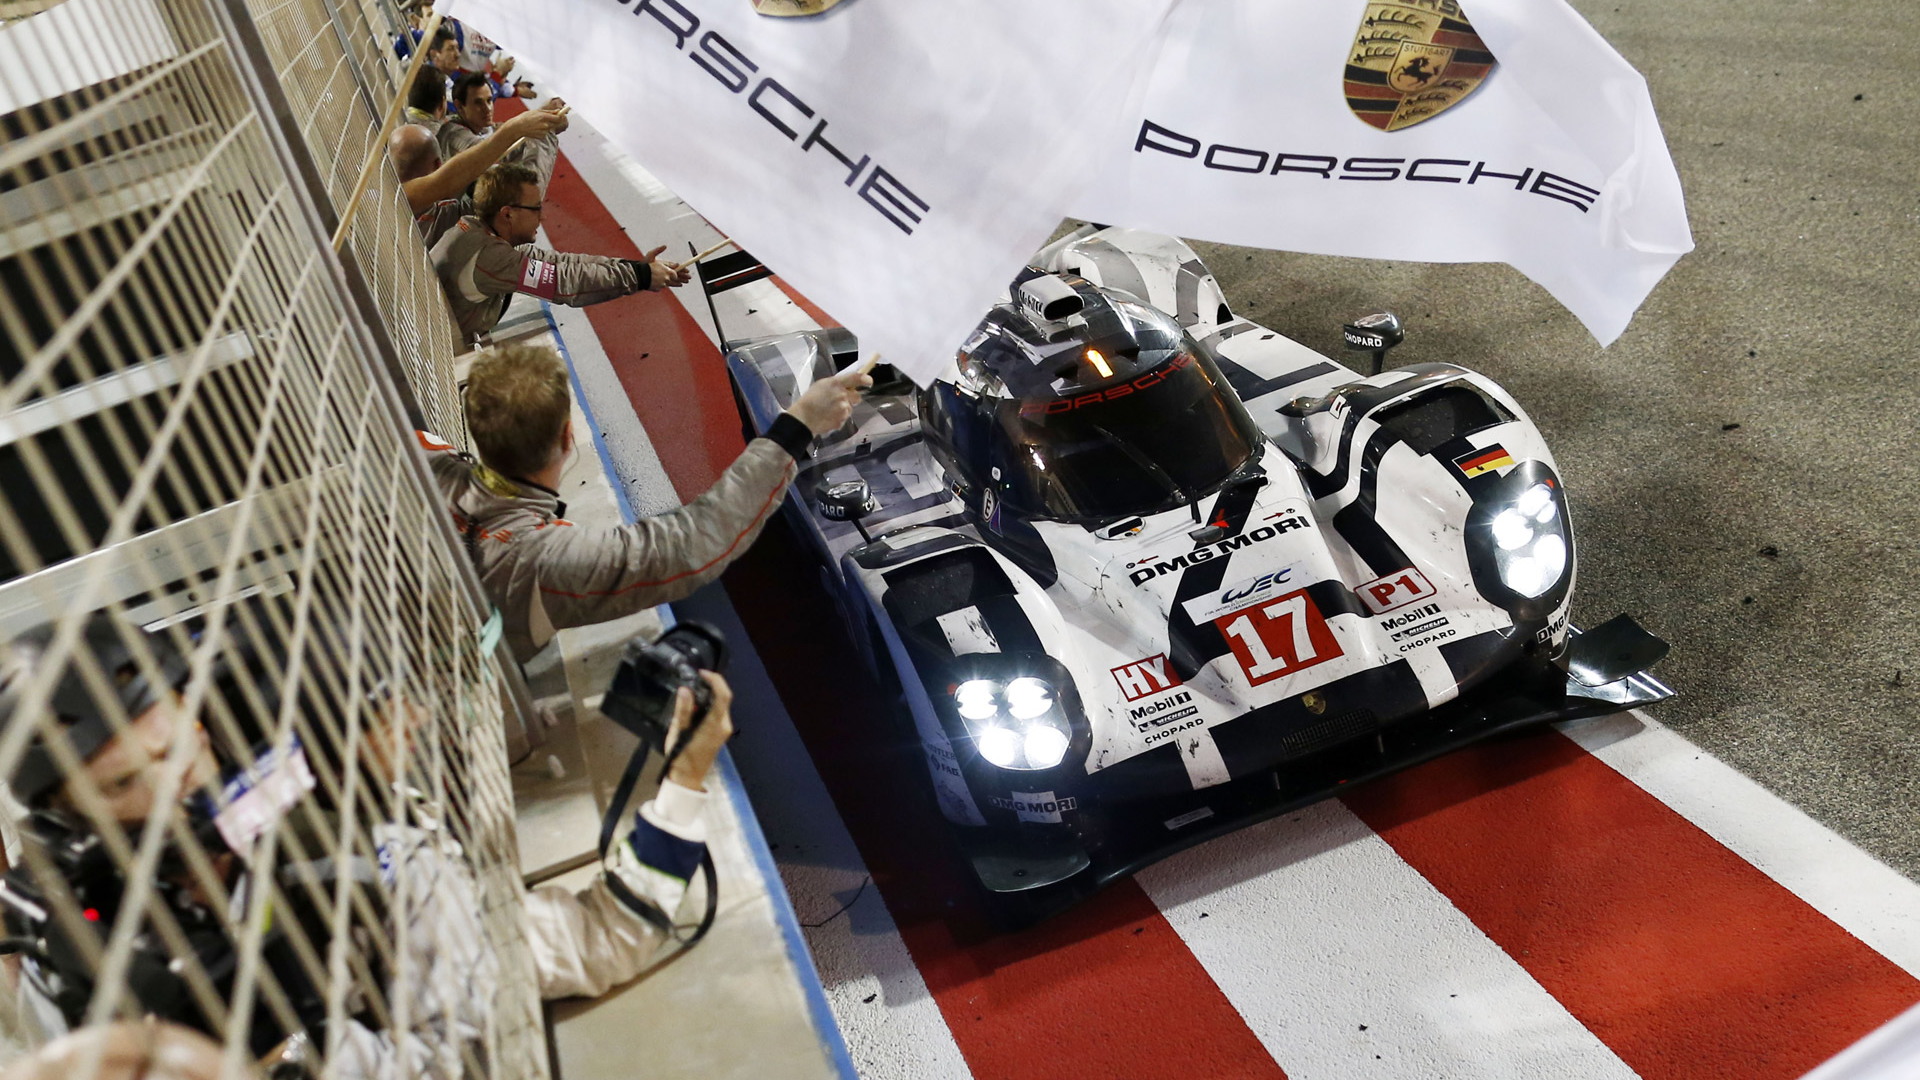 Porsche celebrates Drivers’ and Constructors’ titles in the 2015 World Endurance Championship